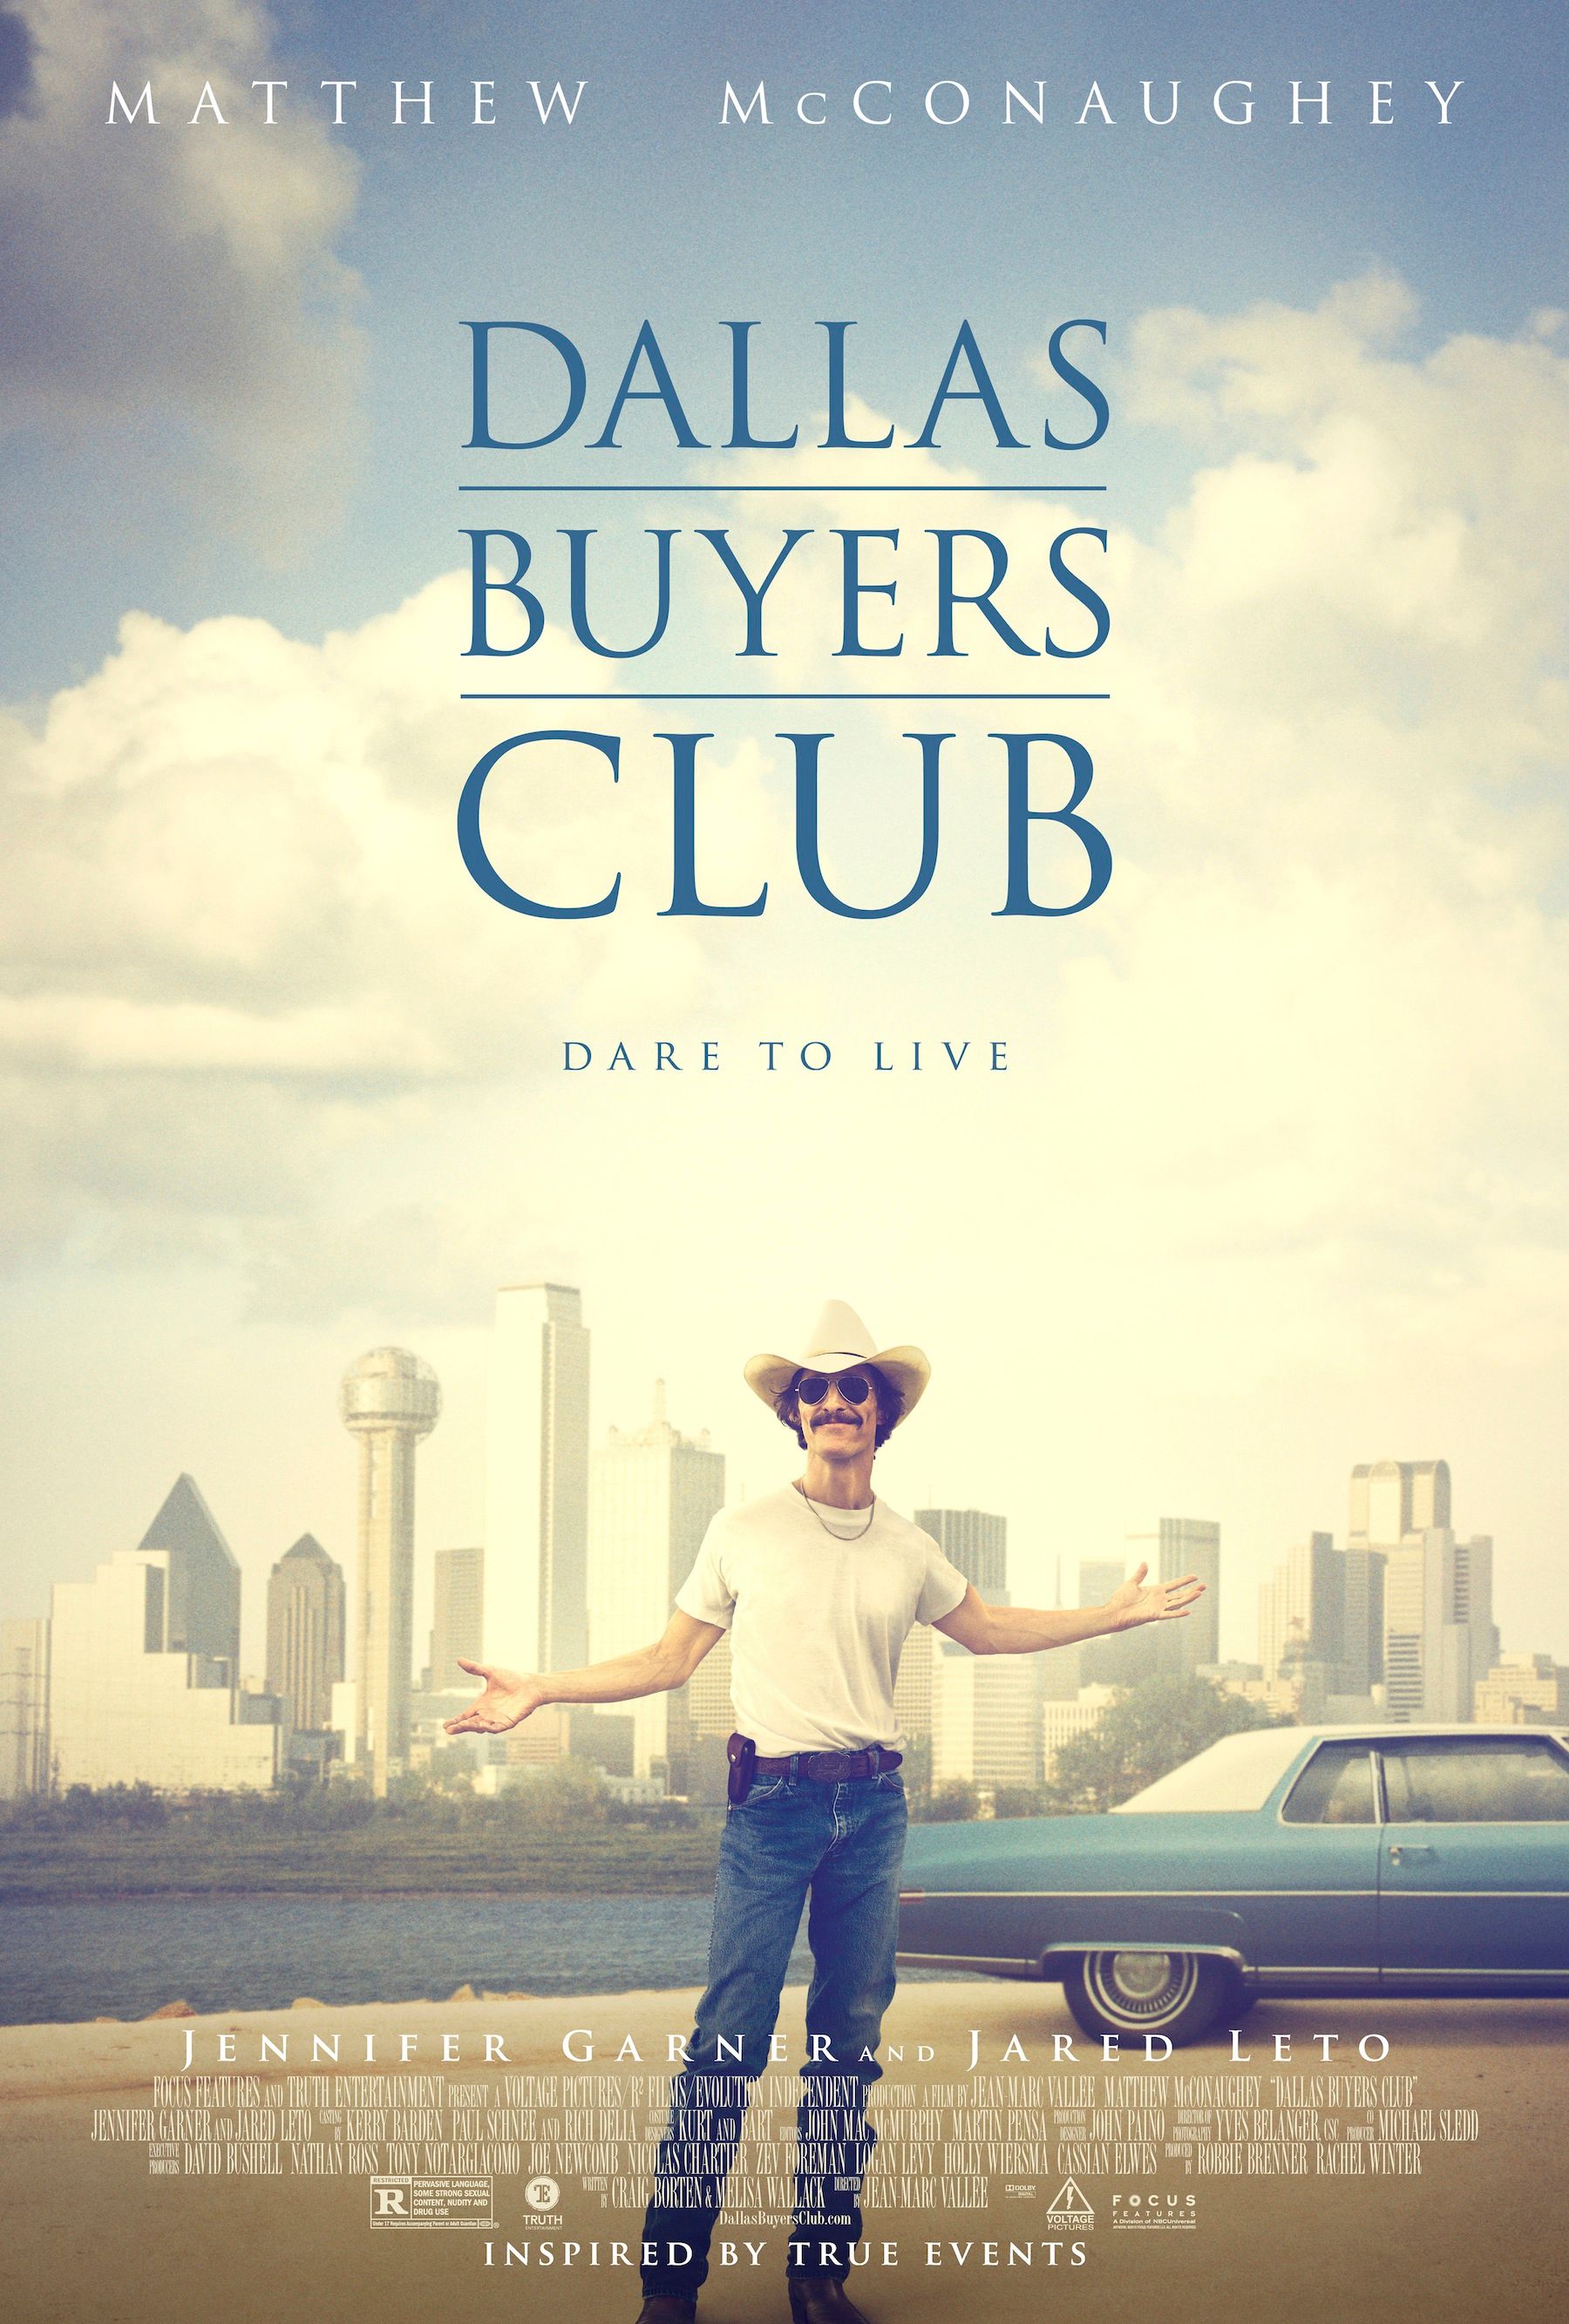 Dallas Buyers Club Reviews, Ratings, Box Office, Trailers, Runtime